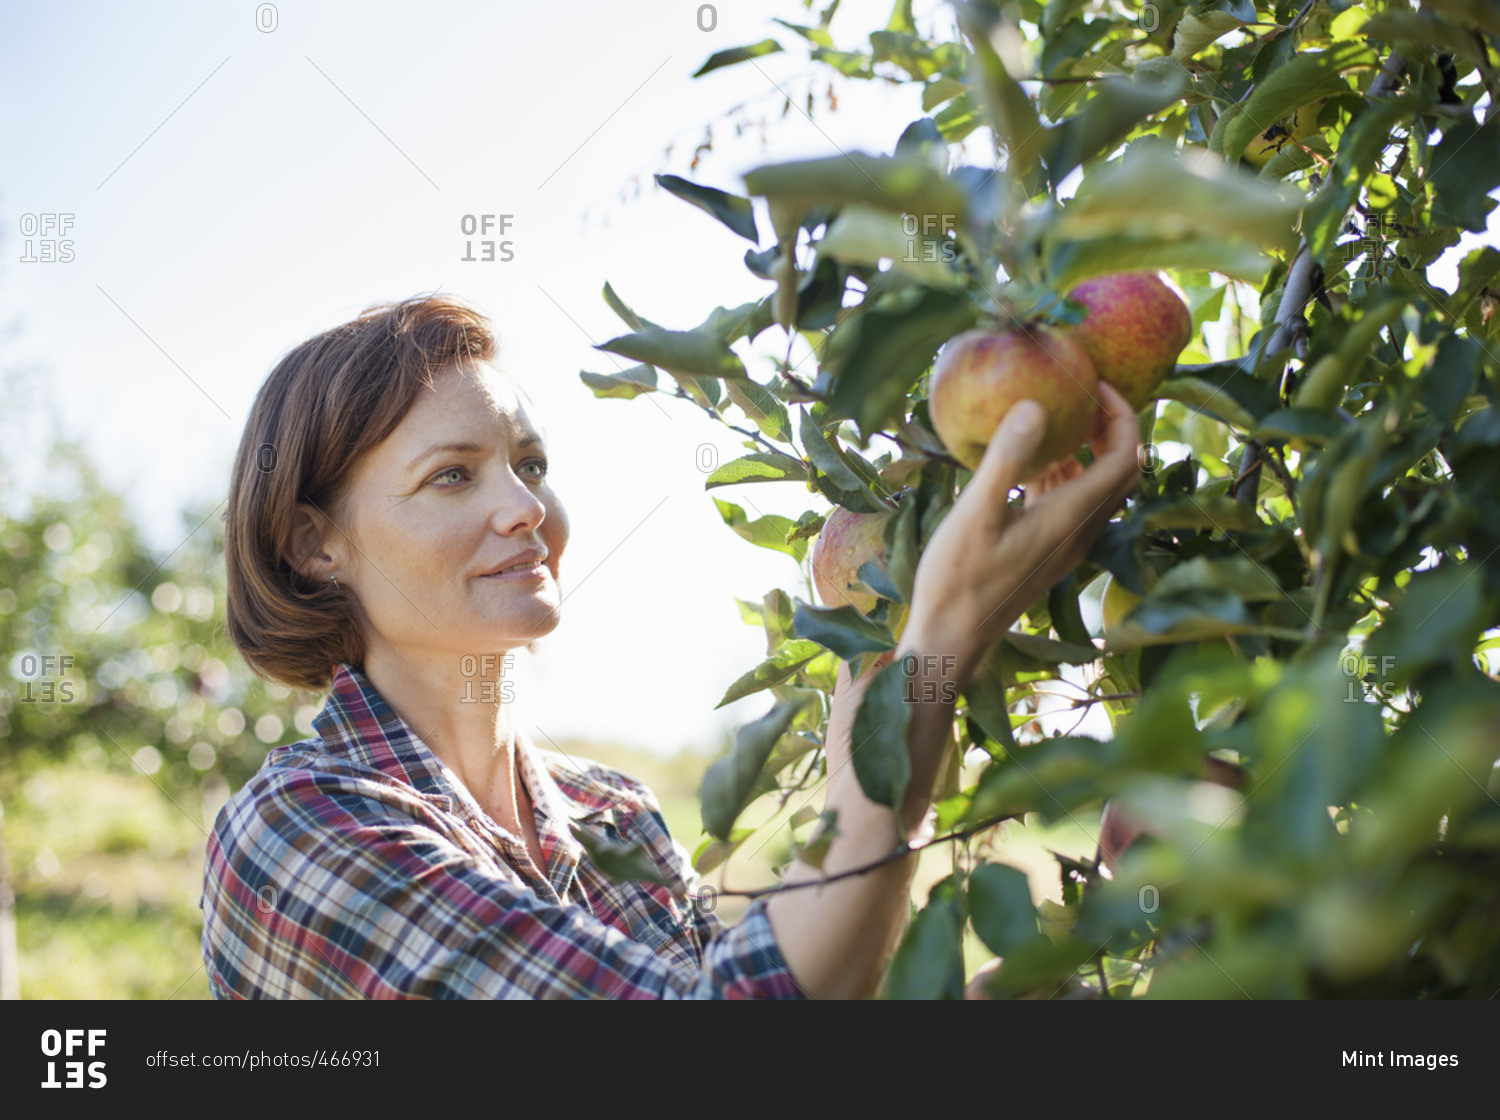 A woman in a plaid shirt picking apples in the orchard at an organic fruit farm